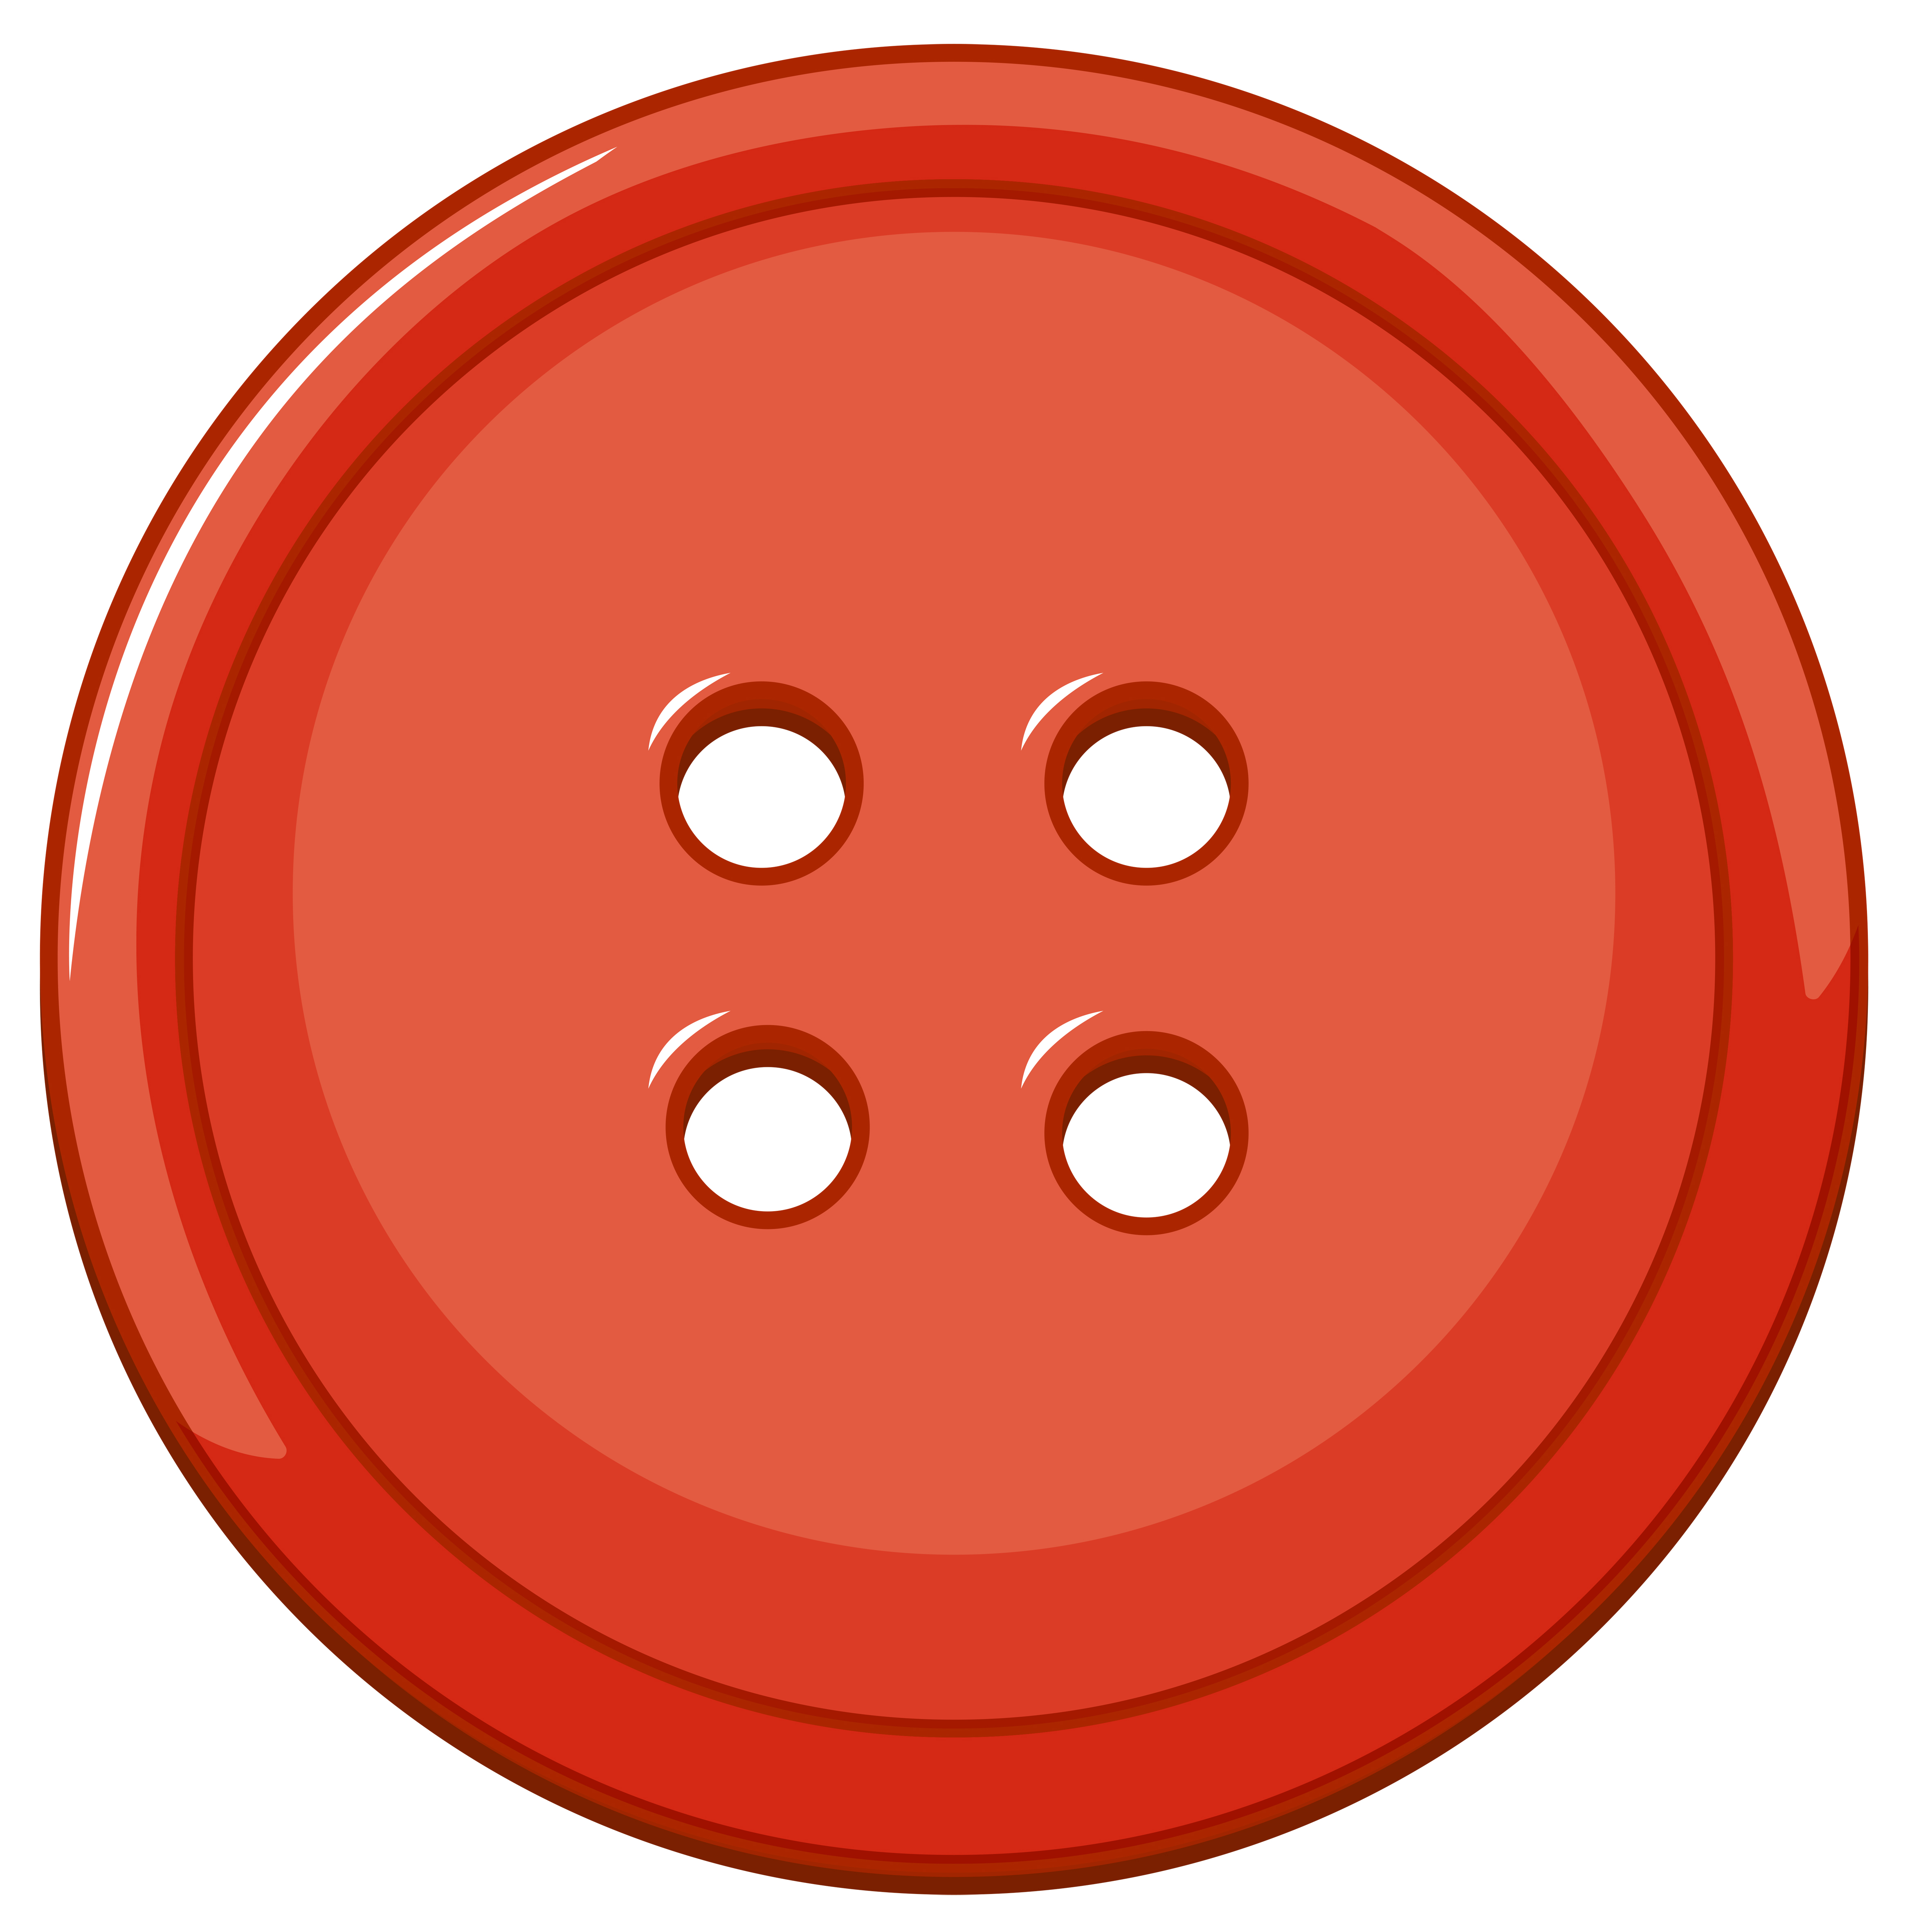 Download Isolated red button on white background 474757 - Download ...